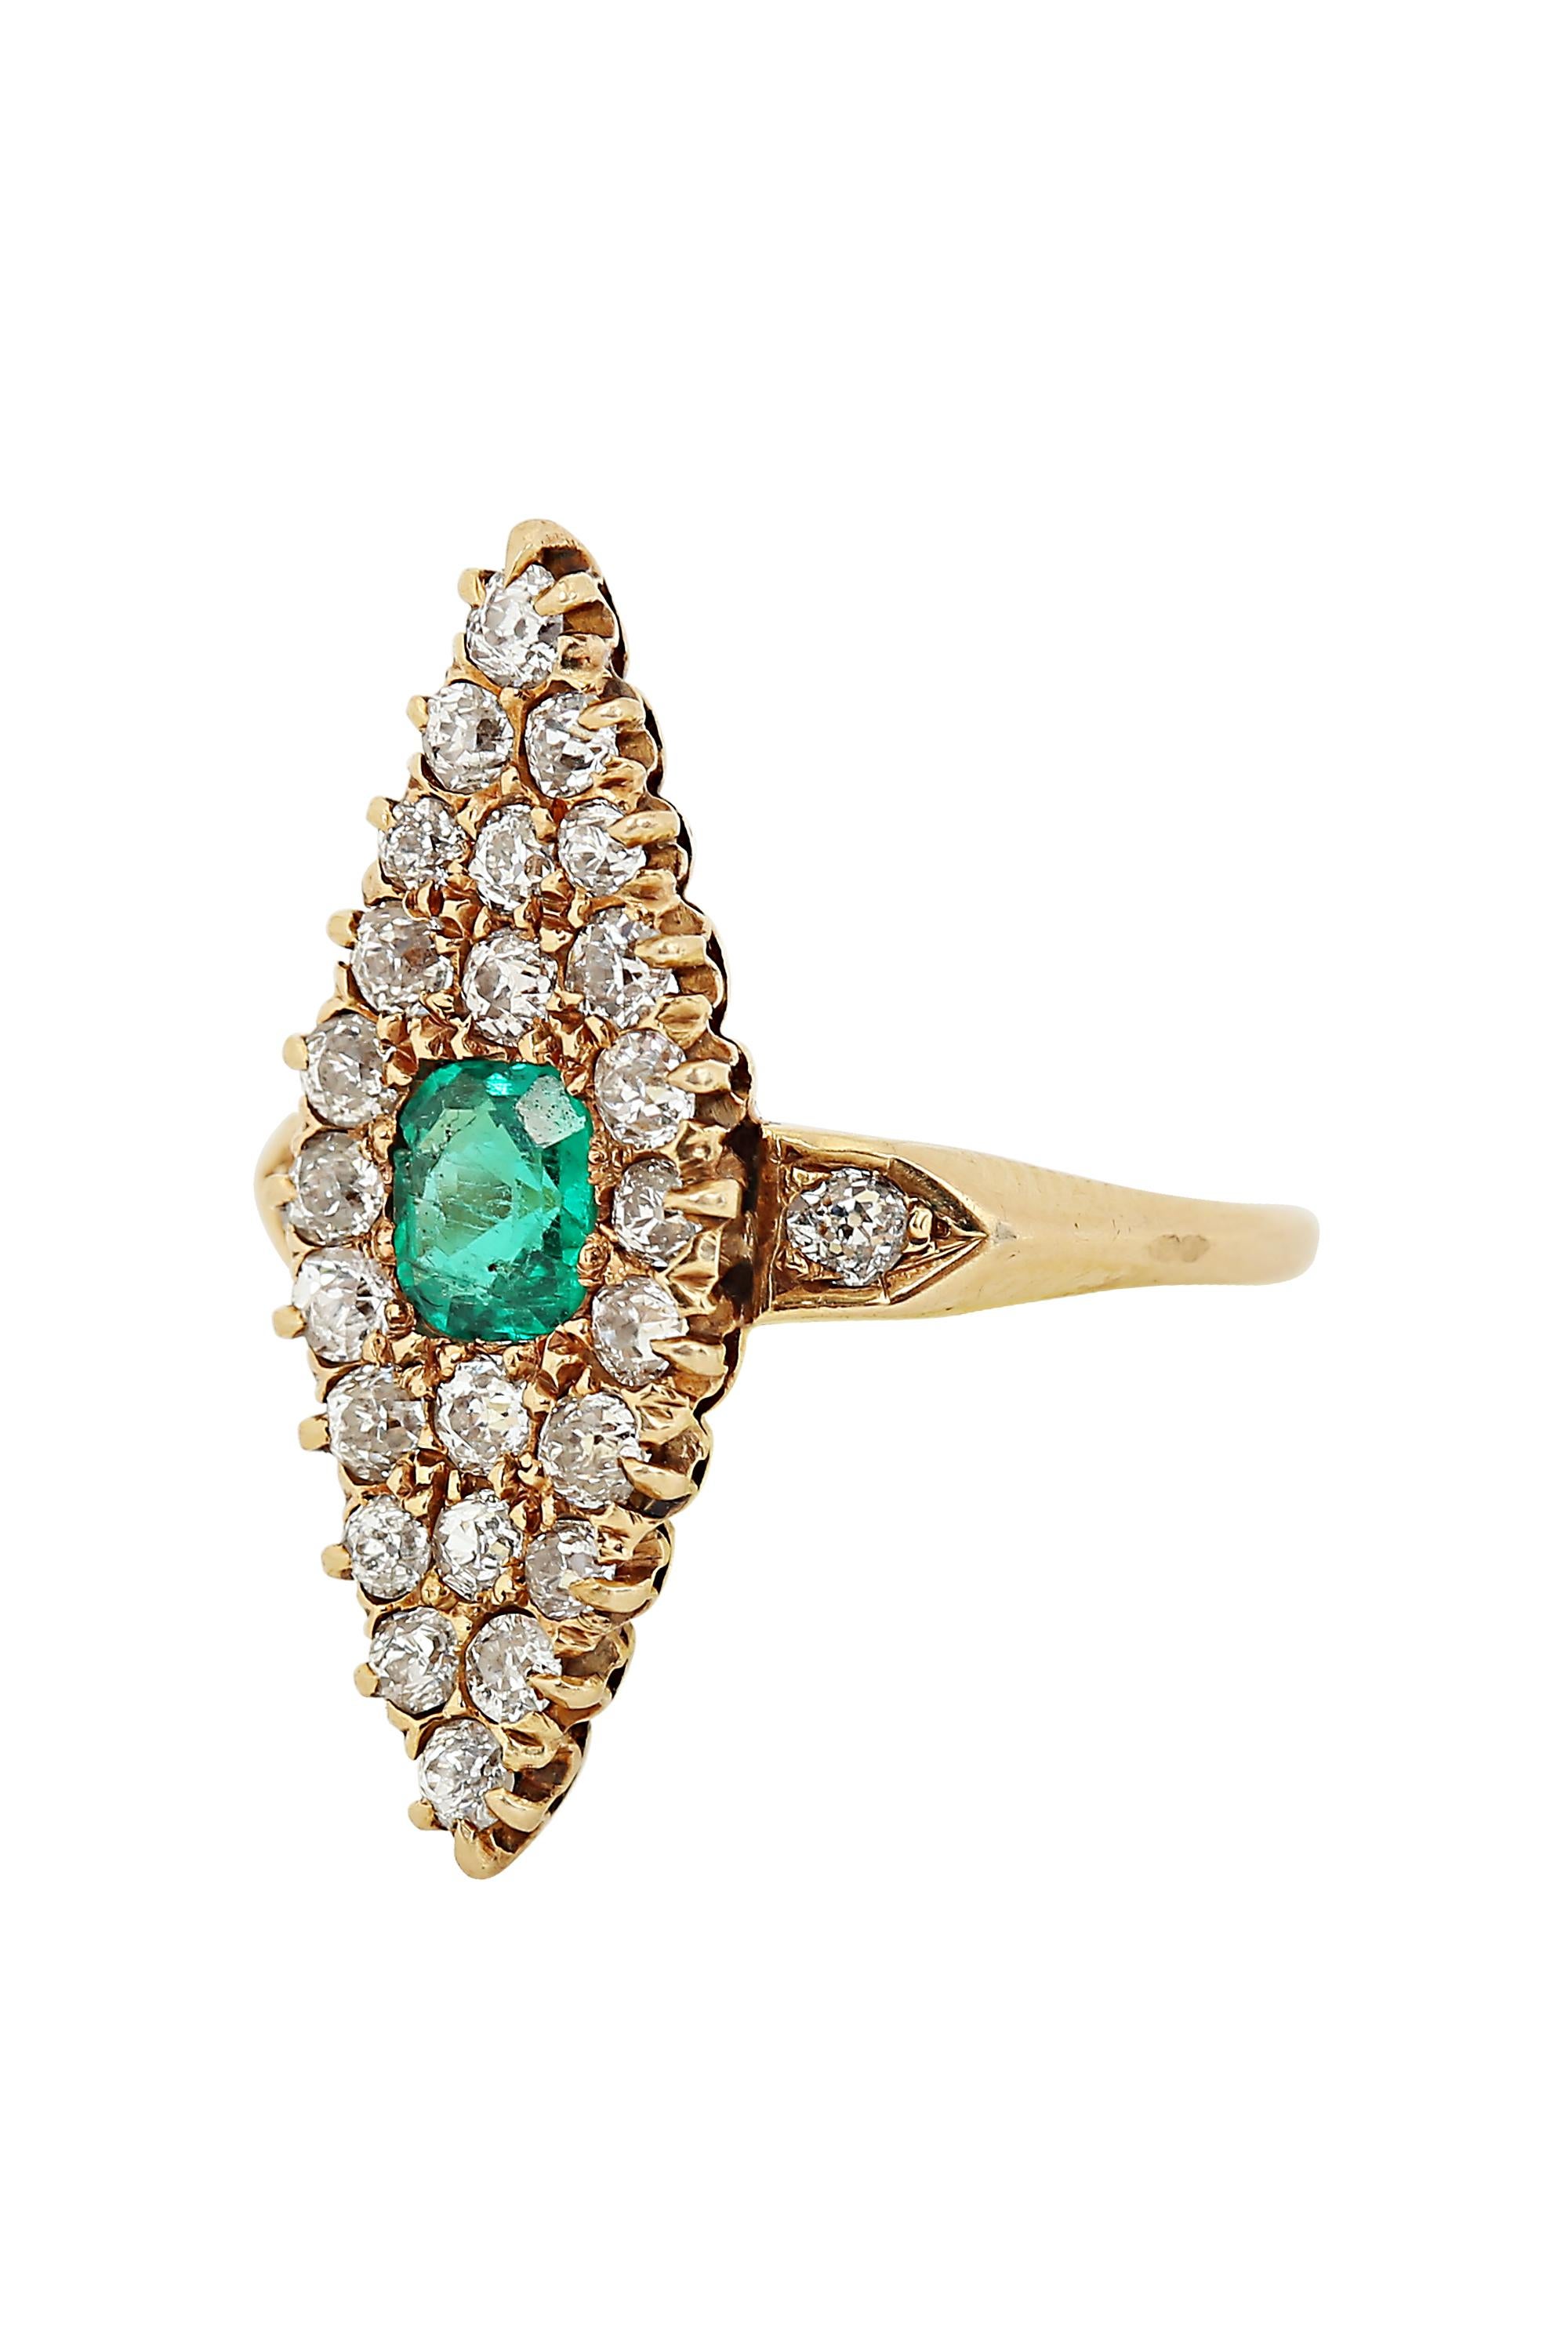 This refined and lovely Victorian ring spotlights a vibrant octagon shaped emerald within a navette shaped field of glittering mine cut diamonds, subtly enhanced at the shoulders with two single diamonds. Set with approximately 1.60 carats of